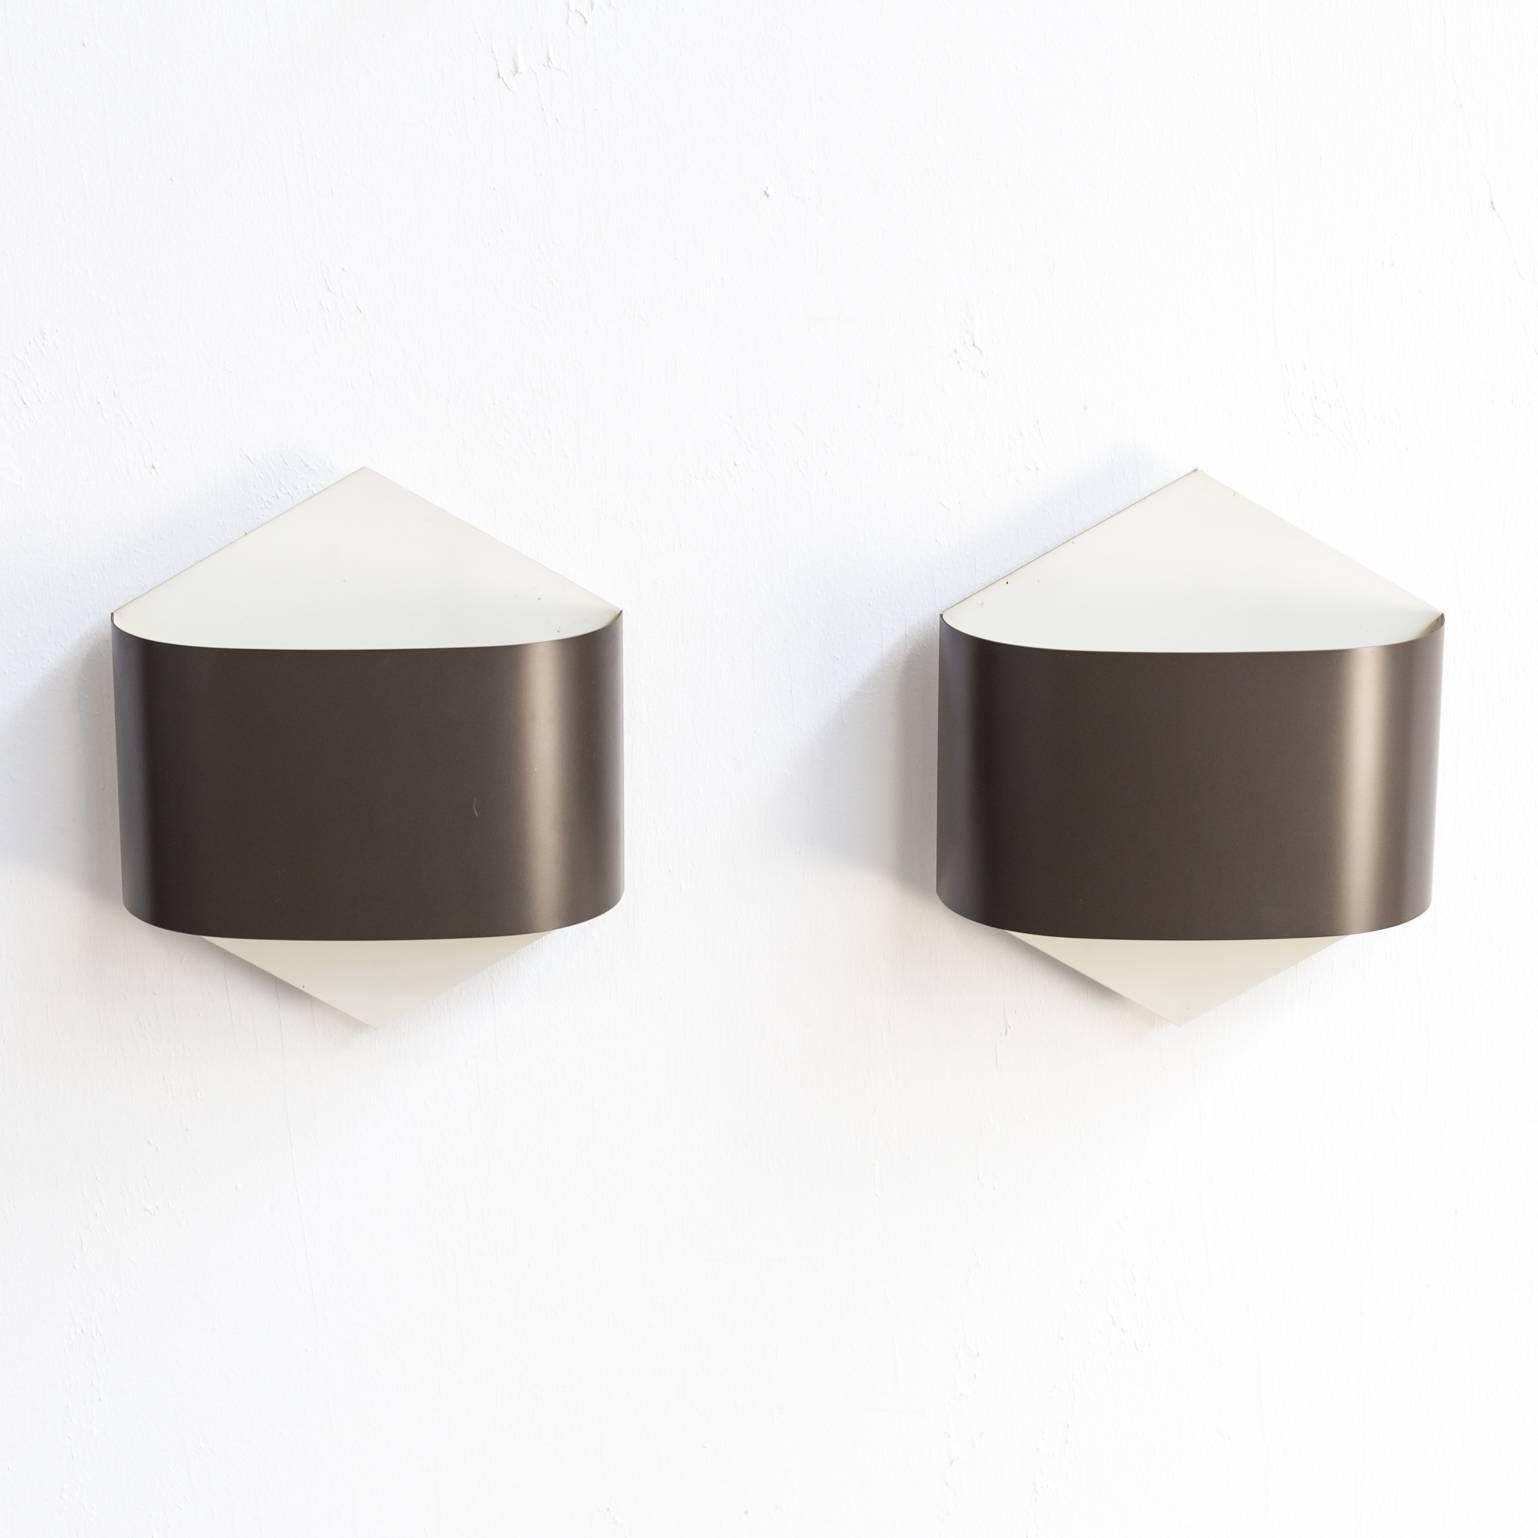 1960s Rolf Krüger & Dieter Witte Wall Sconces by Staff Germany, Set of Two For Sale 7